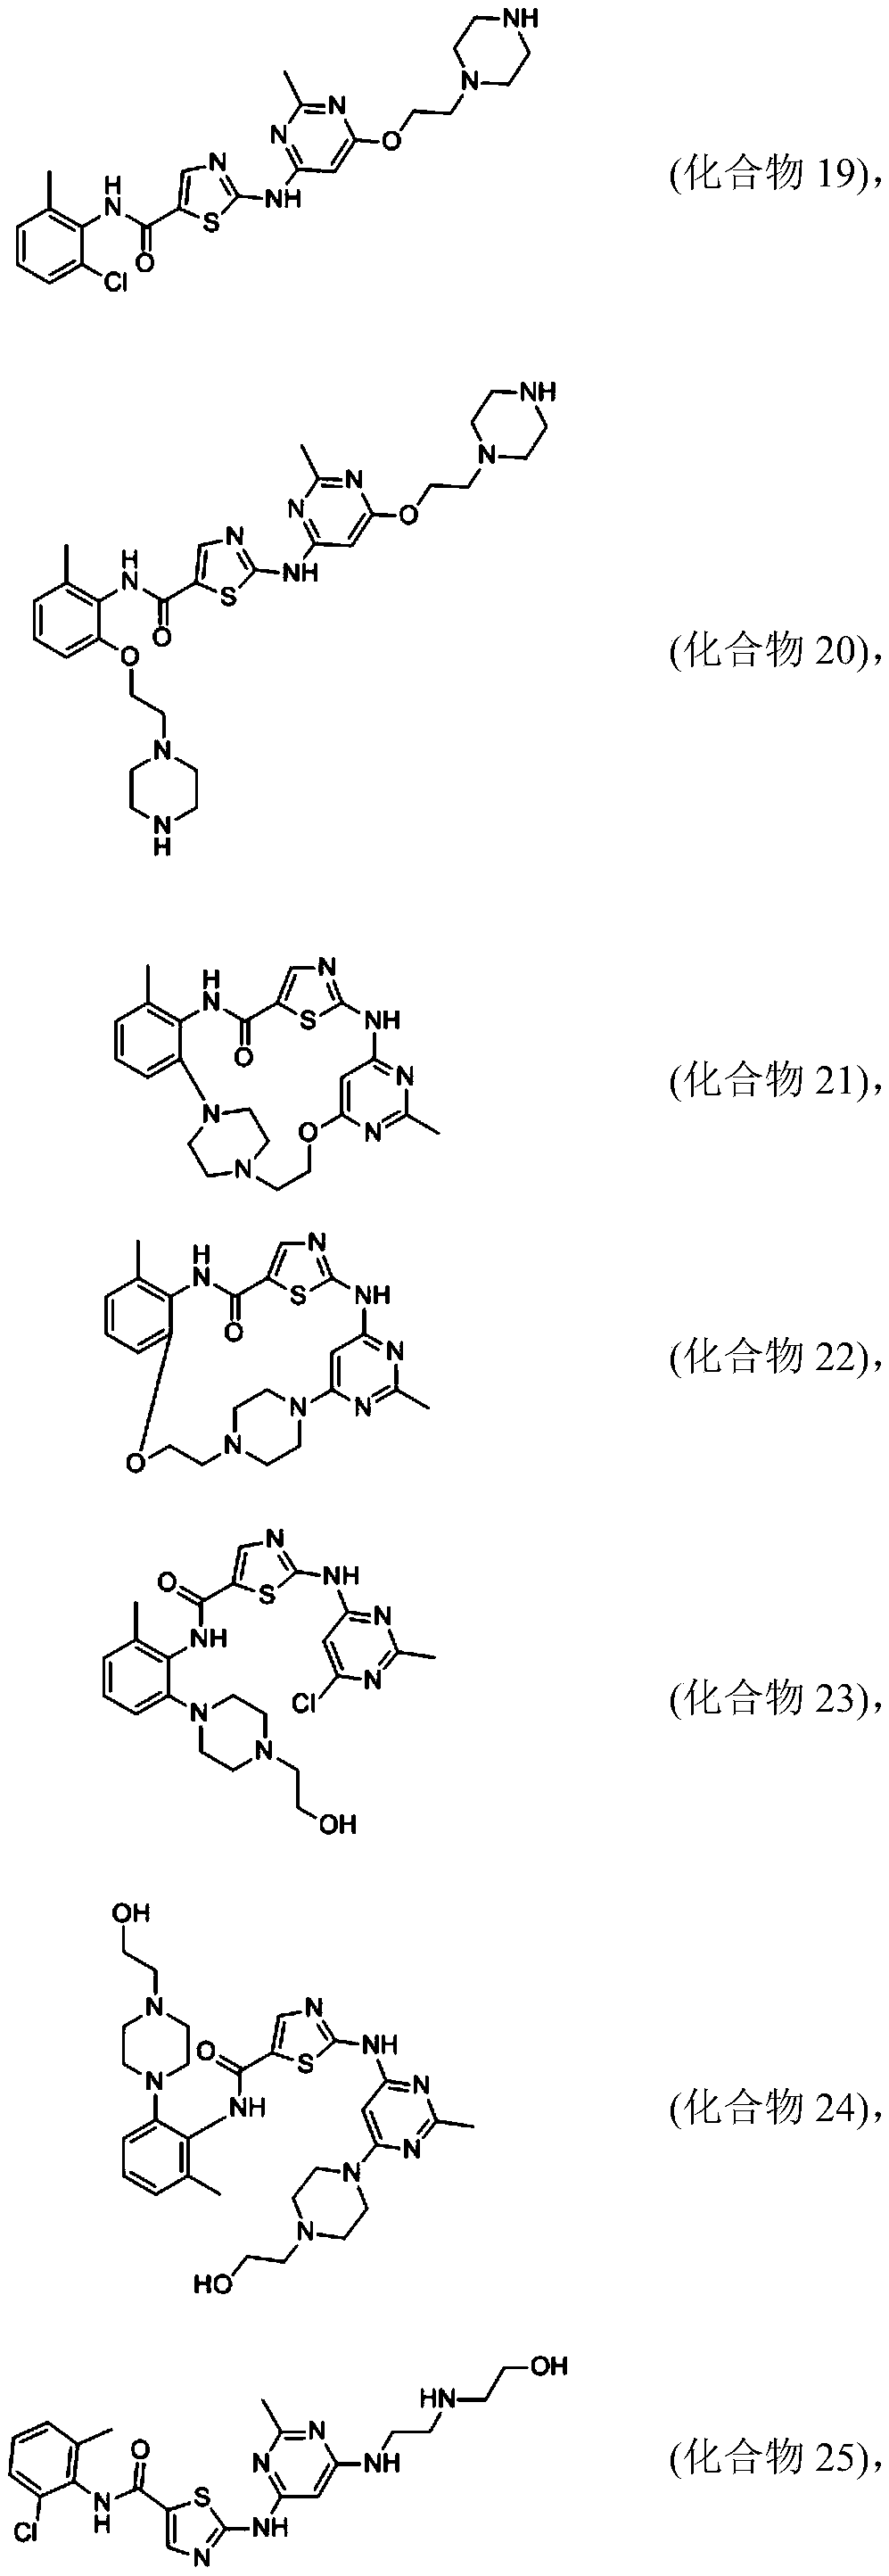 Composition containing phenyl-carbamoyl thiazole derivative mixture and application of composition